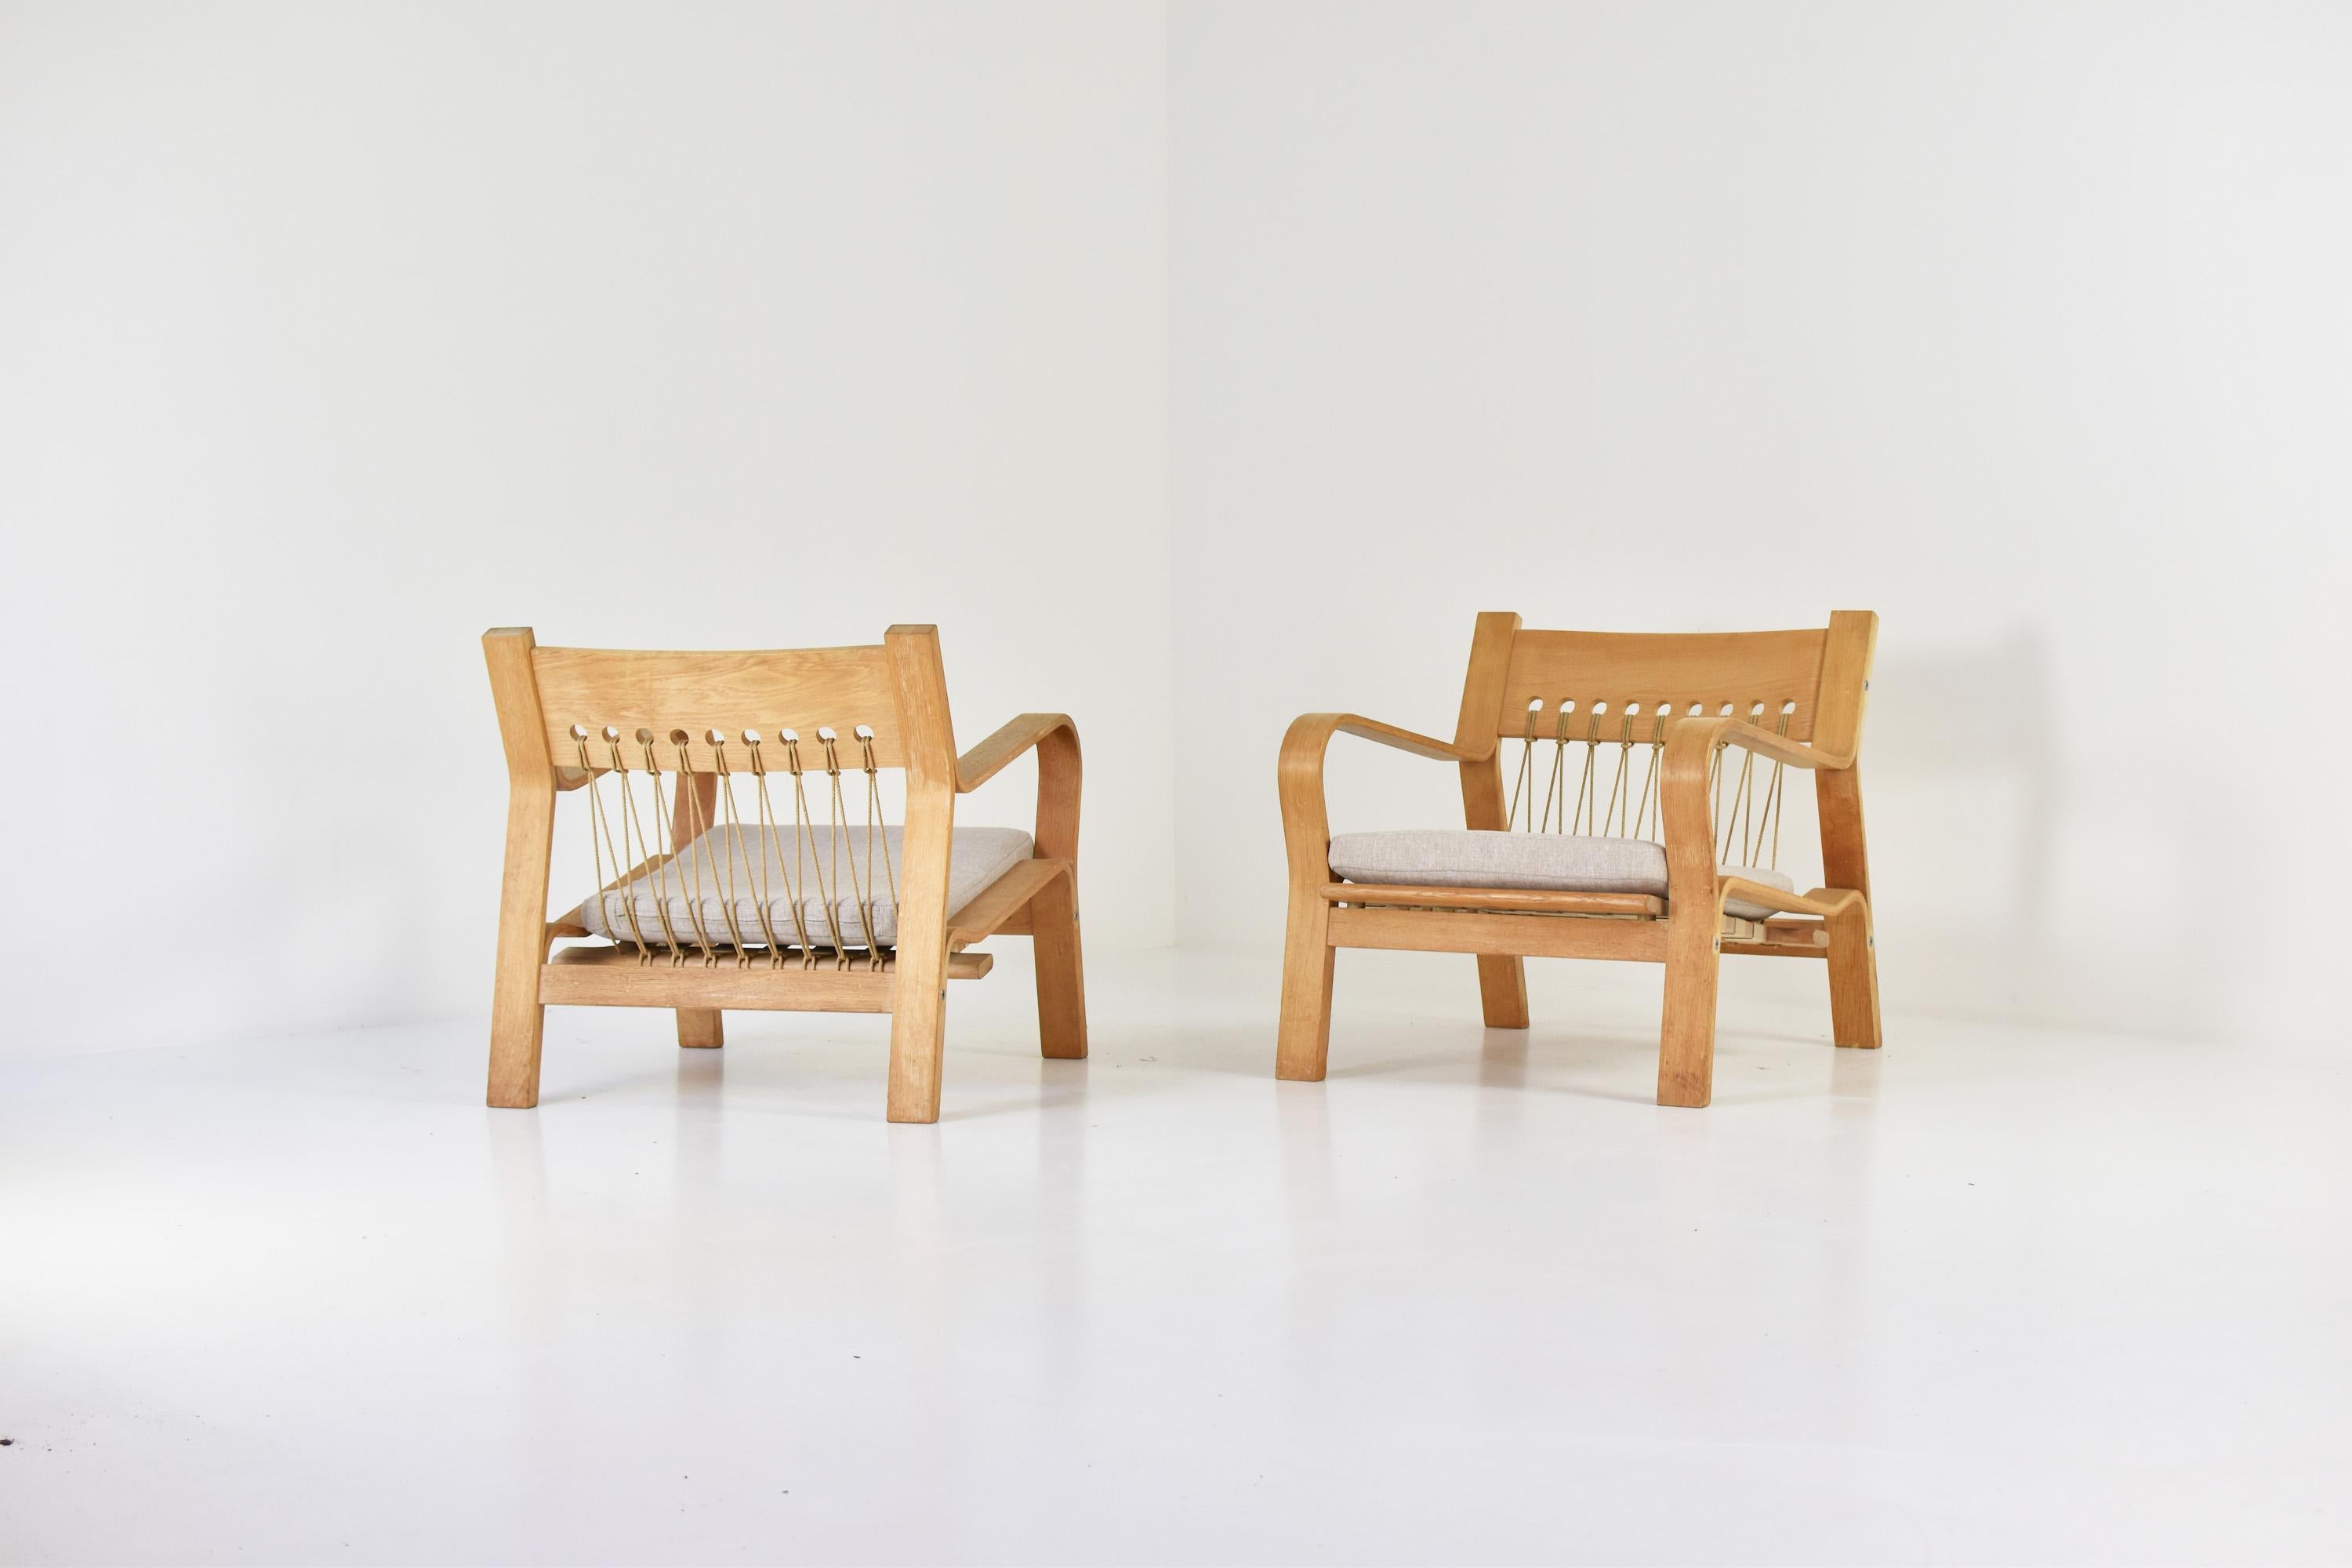 Rare pair of GE 671 easy chairs by Hans Wegner for GETAMA, Denmark, 1967. This pair is made out of solid oak, original papercord and freshly re-upholstered cushions. Masterpiece.